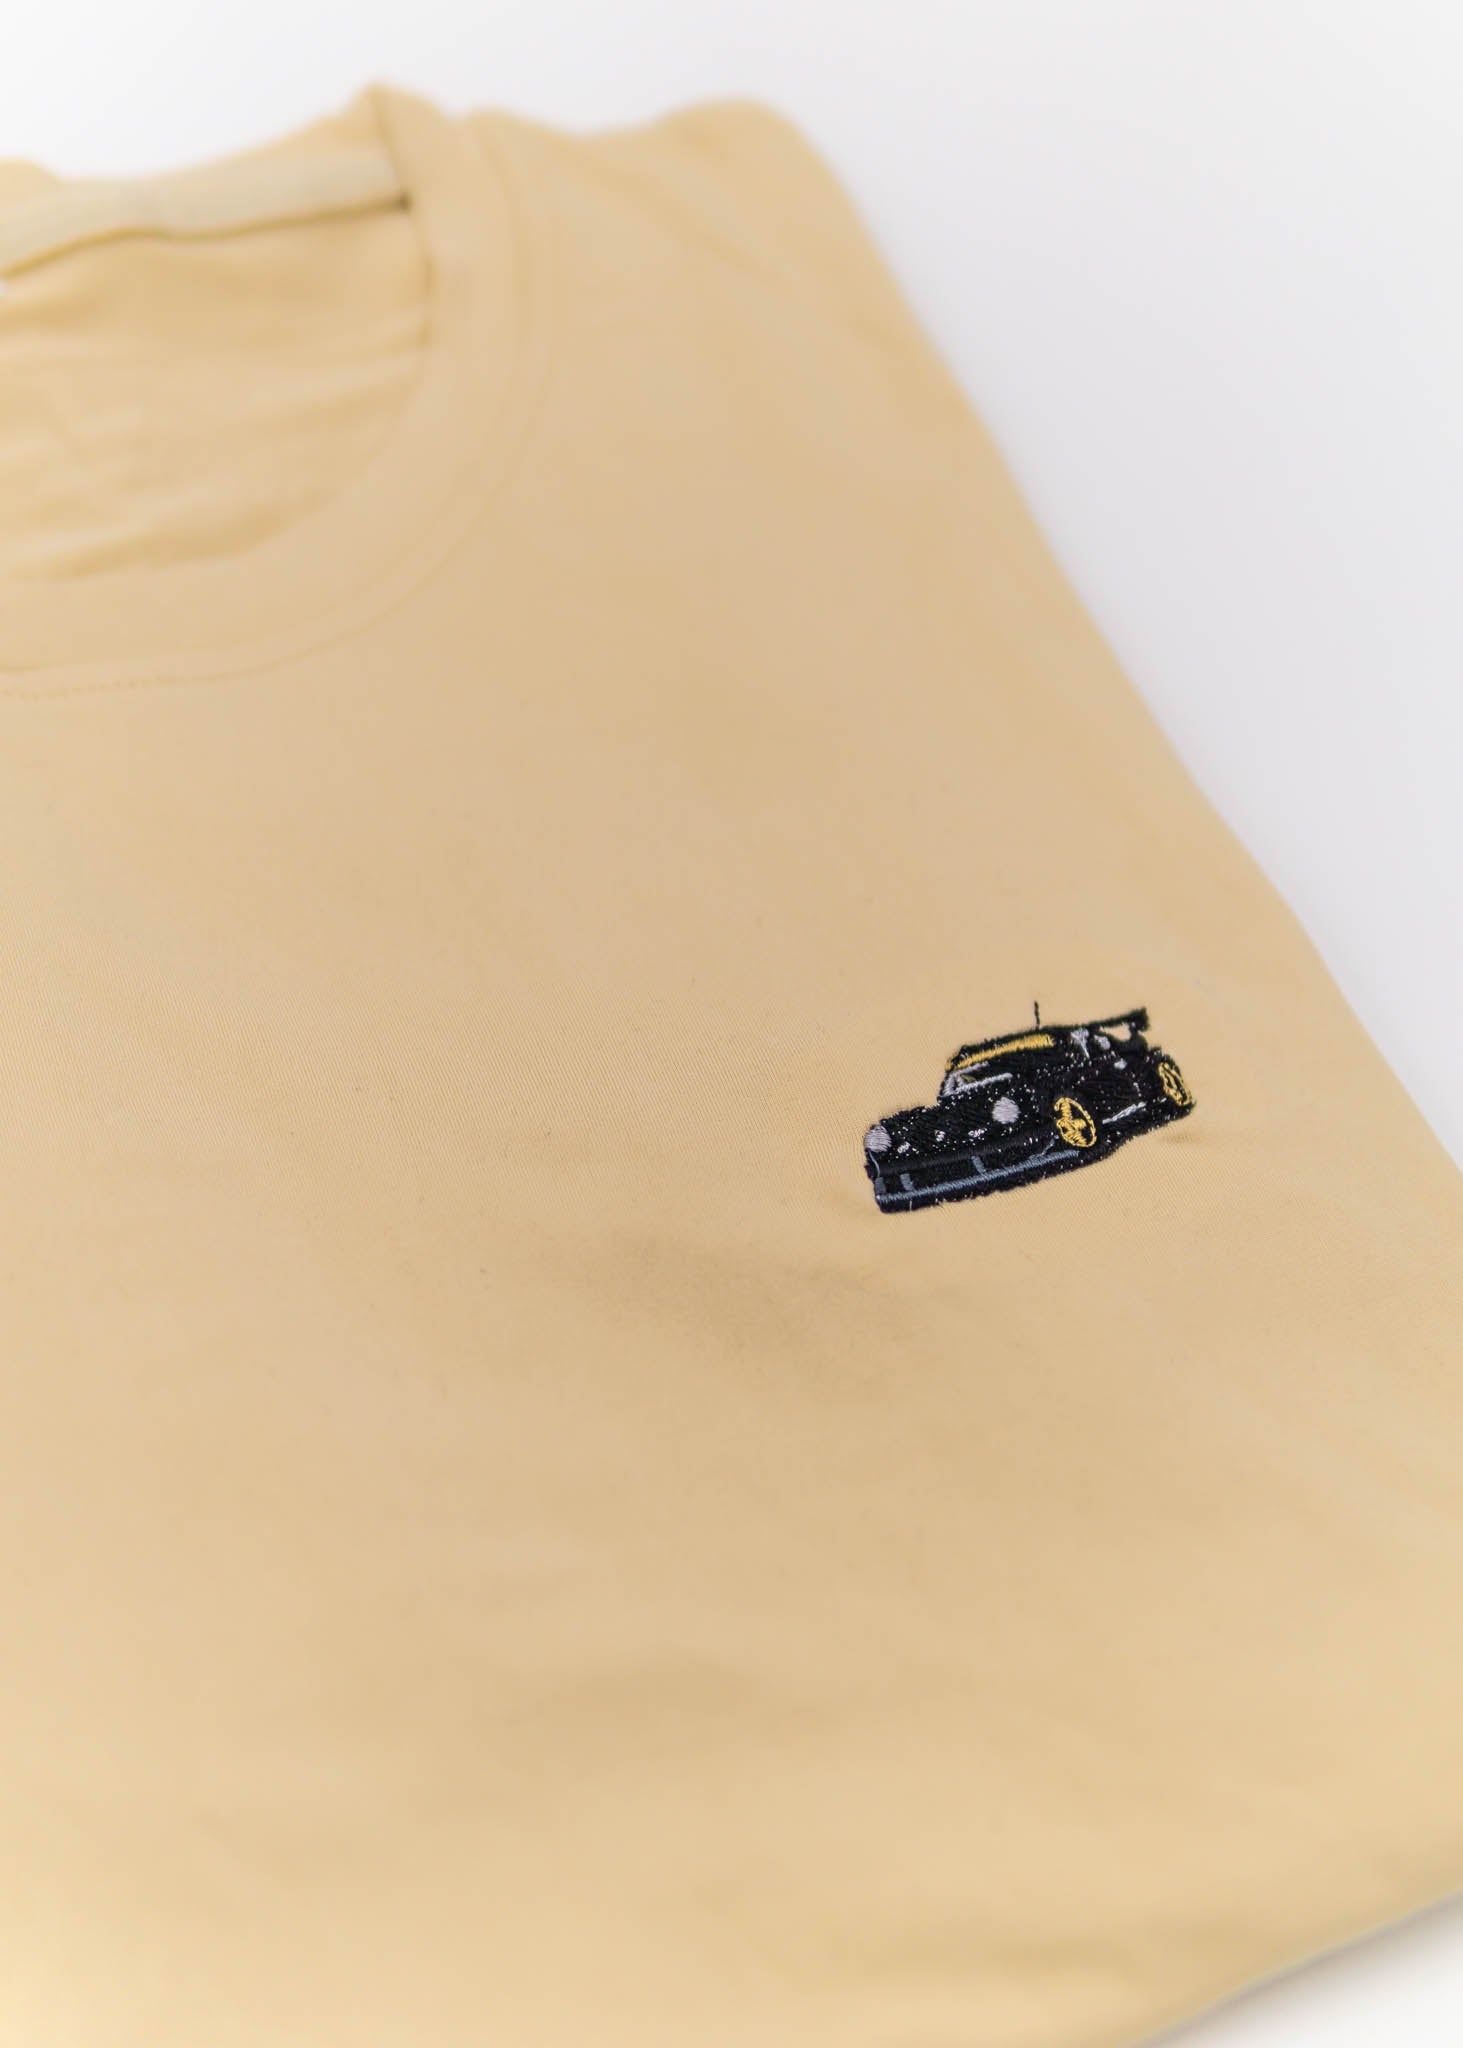 A Khaki RWB Porsche 930 911 Turbo T-Shirt for men. Photo is a close up view of the shirt with Akira Nakai's RWB Porsche 930 911 Turbo Stella Artois. Fabric composition is a polyester, and cotton mix. The material is very stretchy, soft, comfortable, and non-transparent. The style of this shirt is short sleeve, with a crewneck neckline.